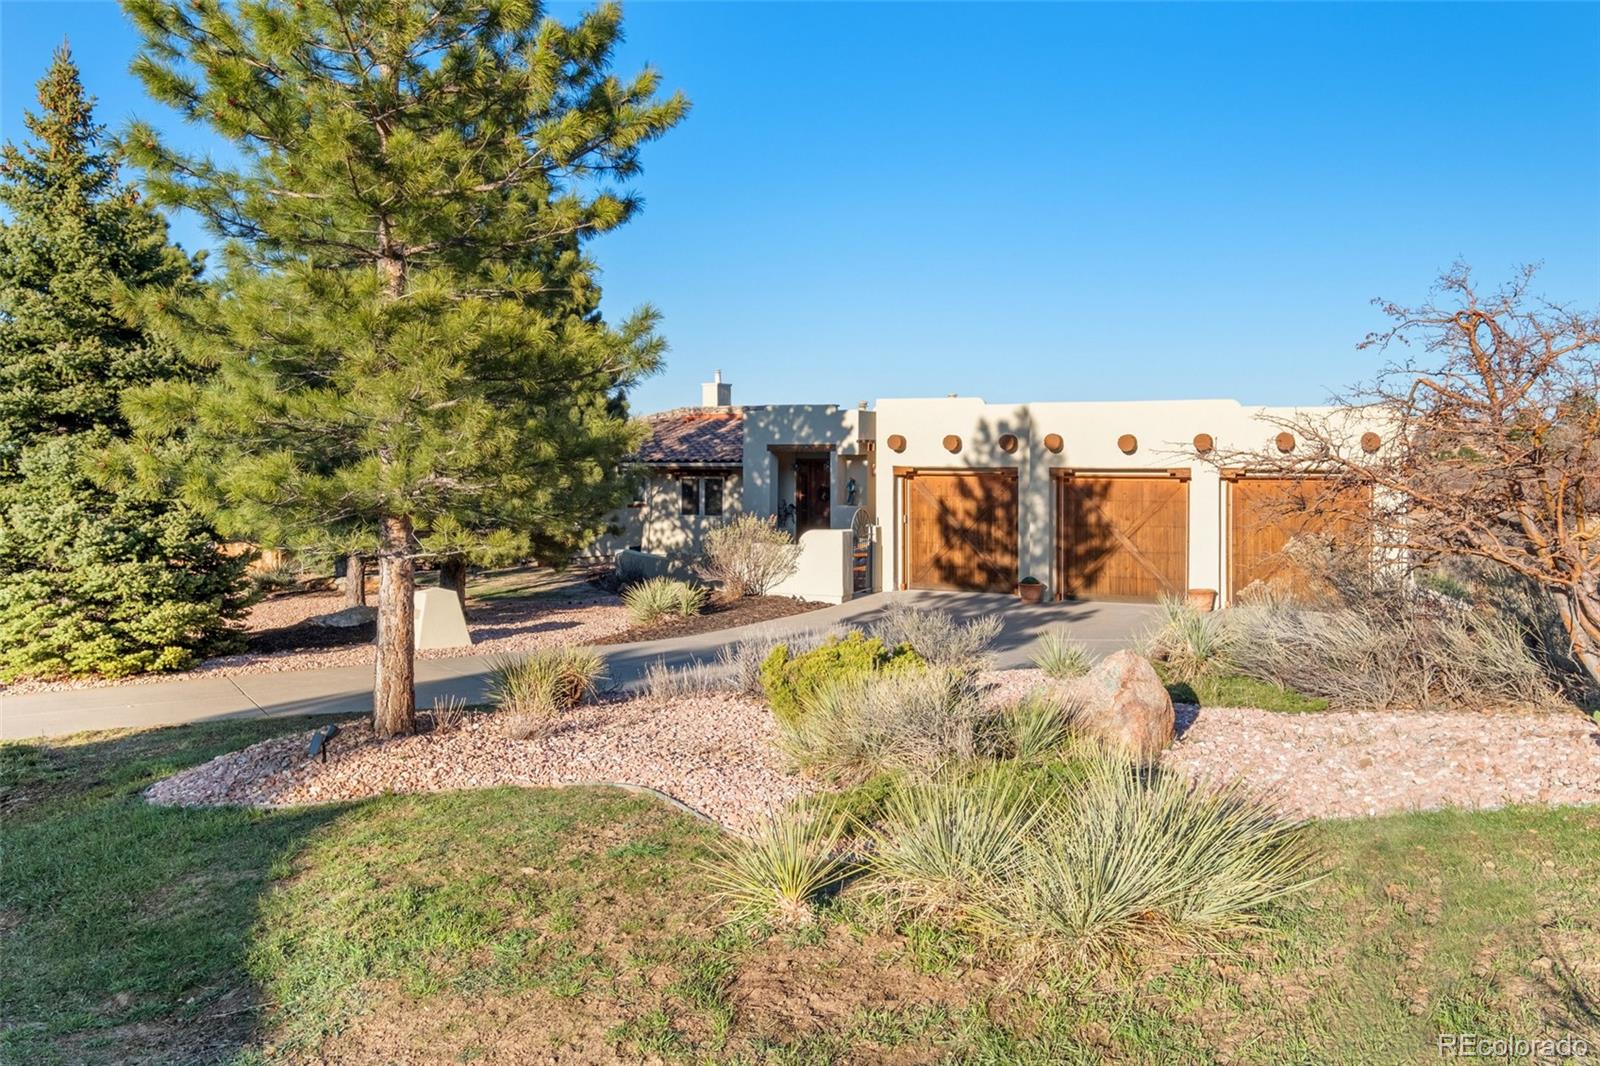 7598  hawks nest trail , littleton sold home. Closed on 2024-05-10 for $1,325,000.